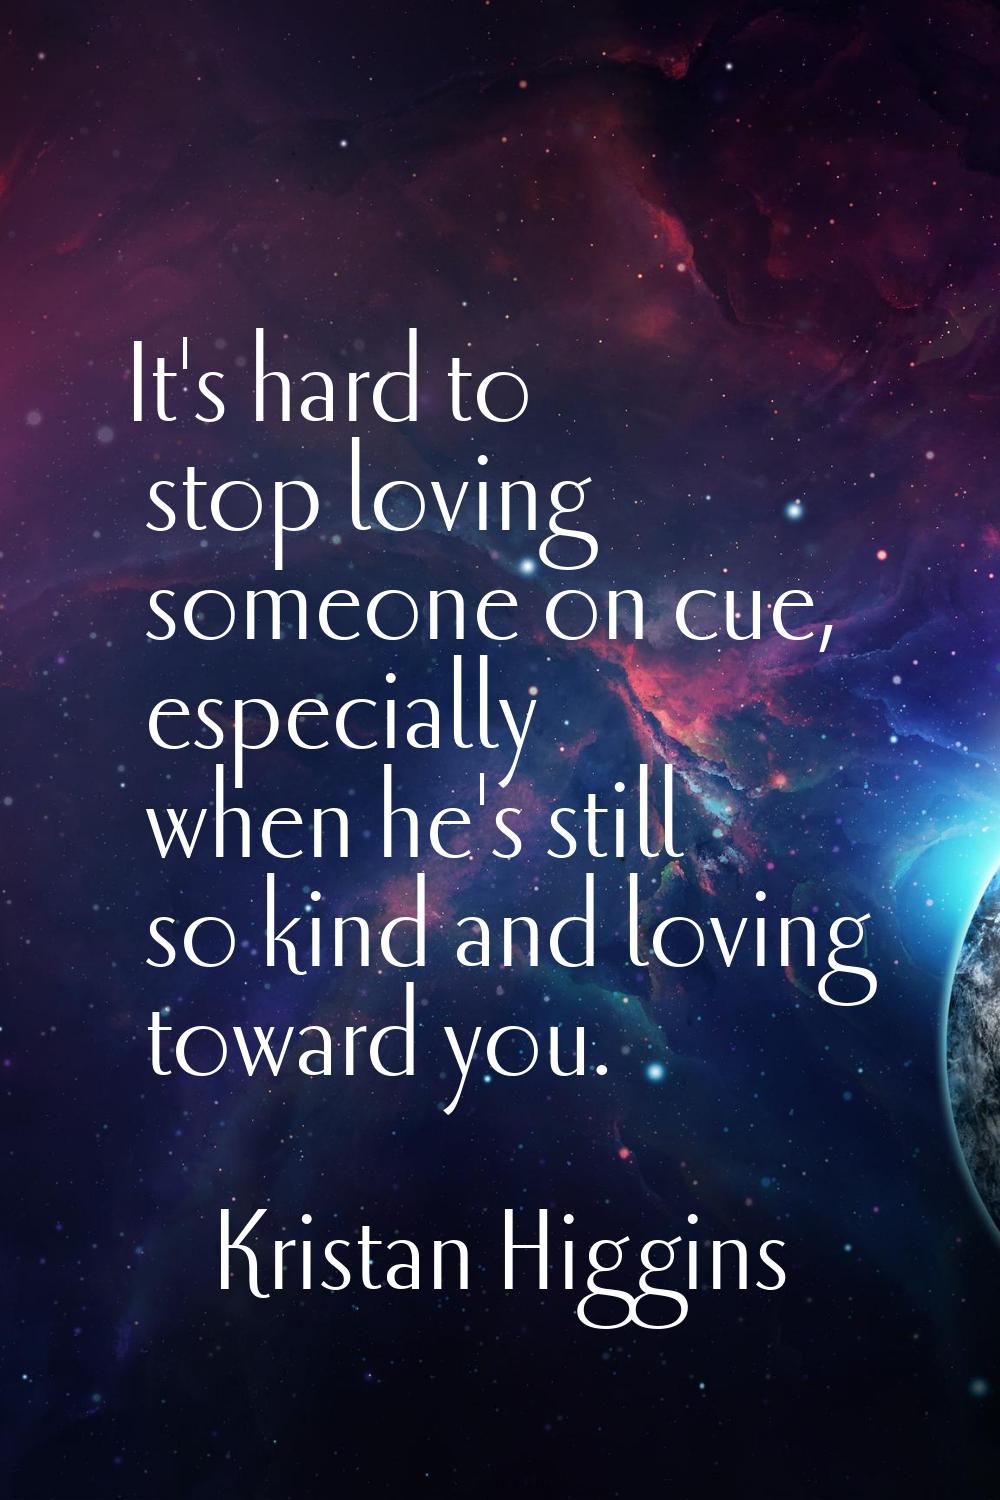 It's hard to stop loving someone on cue, especially when he's still so kind and loving toward you.